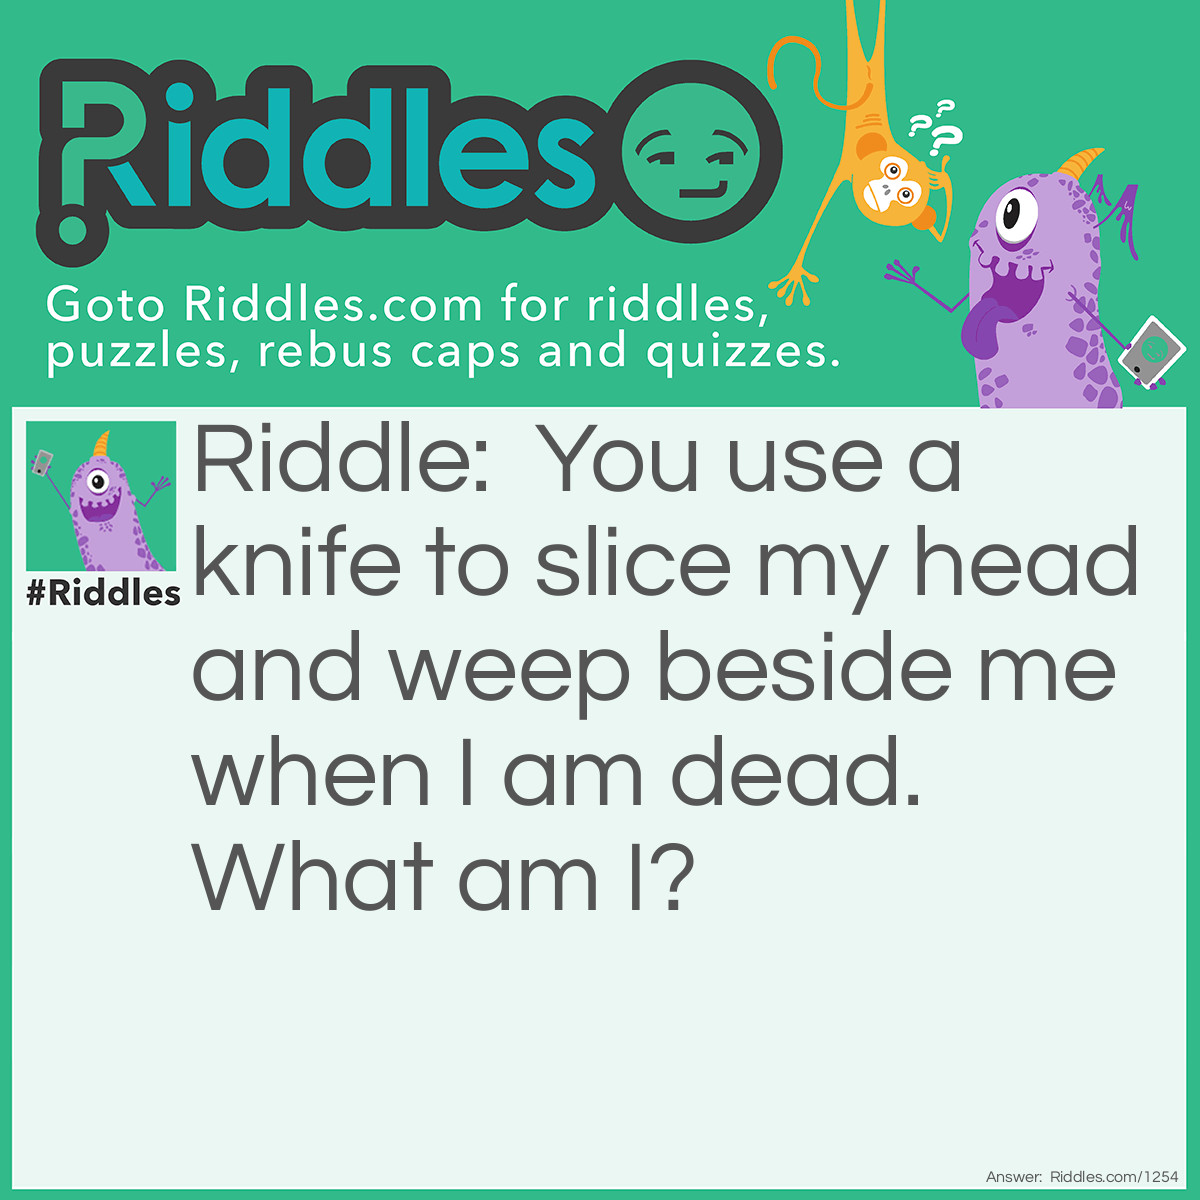 Riddle: You use a knife to slice my head and weep beside me when I am dead.
What am I? Answer: An onion.